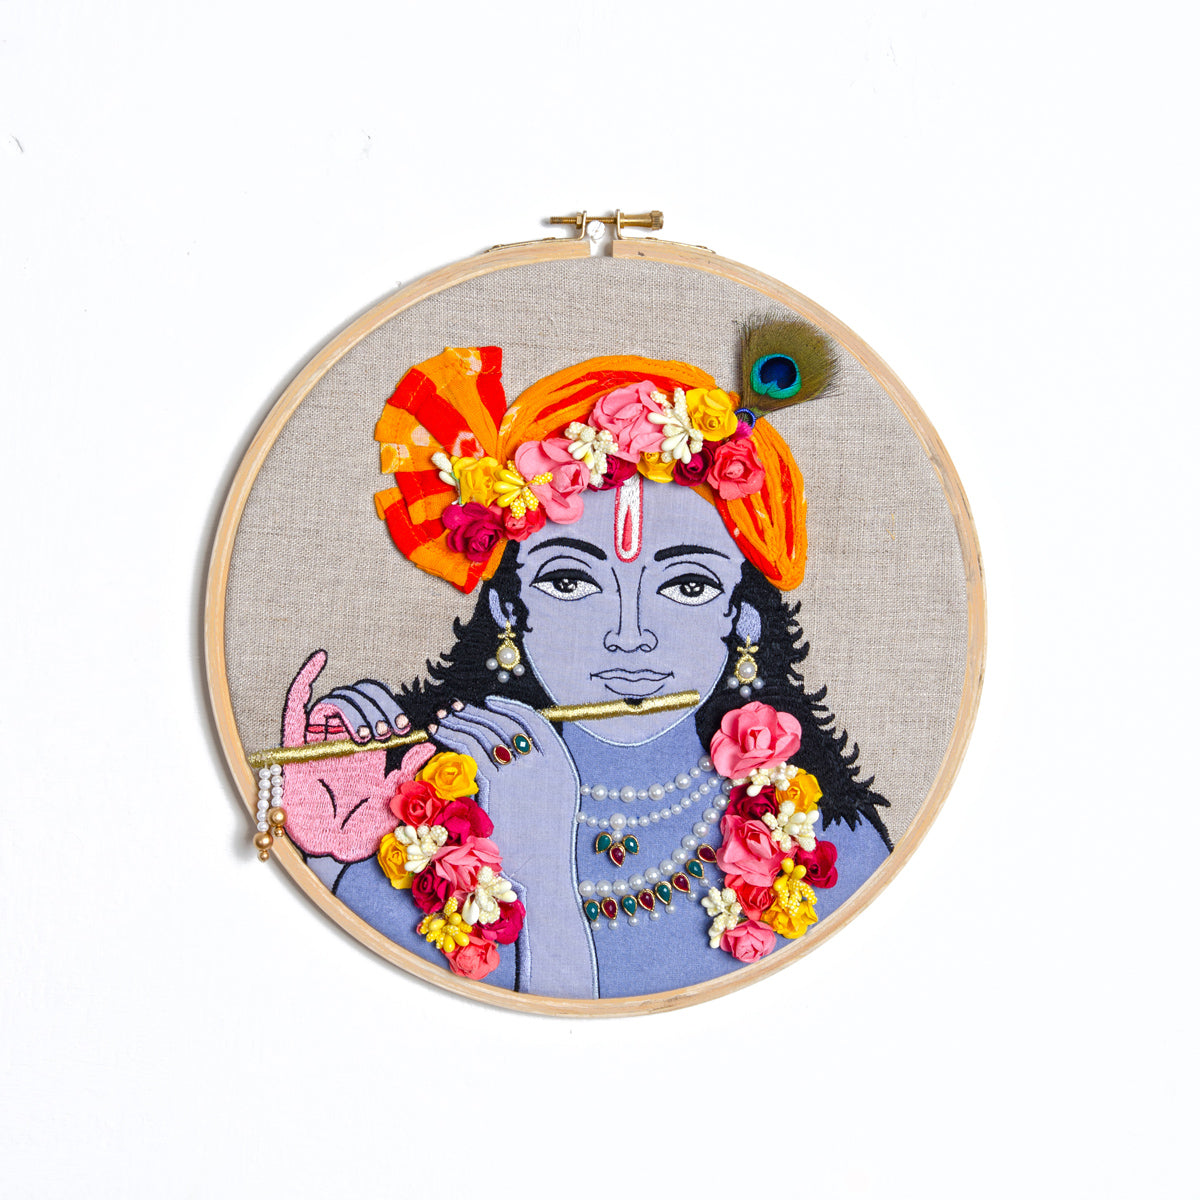 KRISHNA WALL ART - on Embroidery Hoop or wooden frame, linen with bright colours